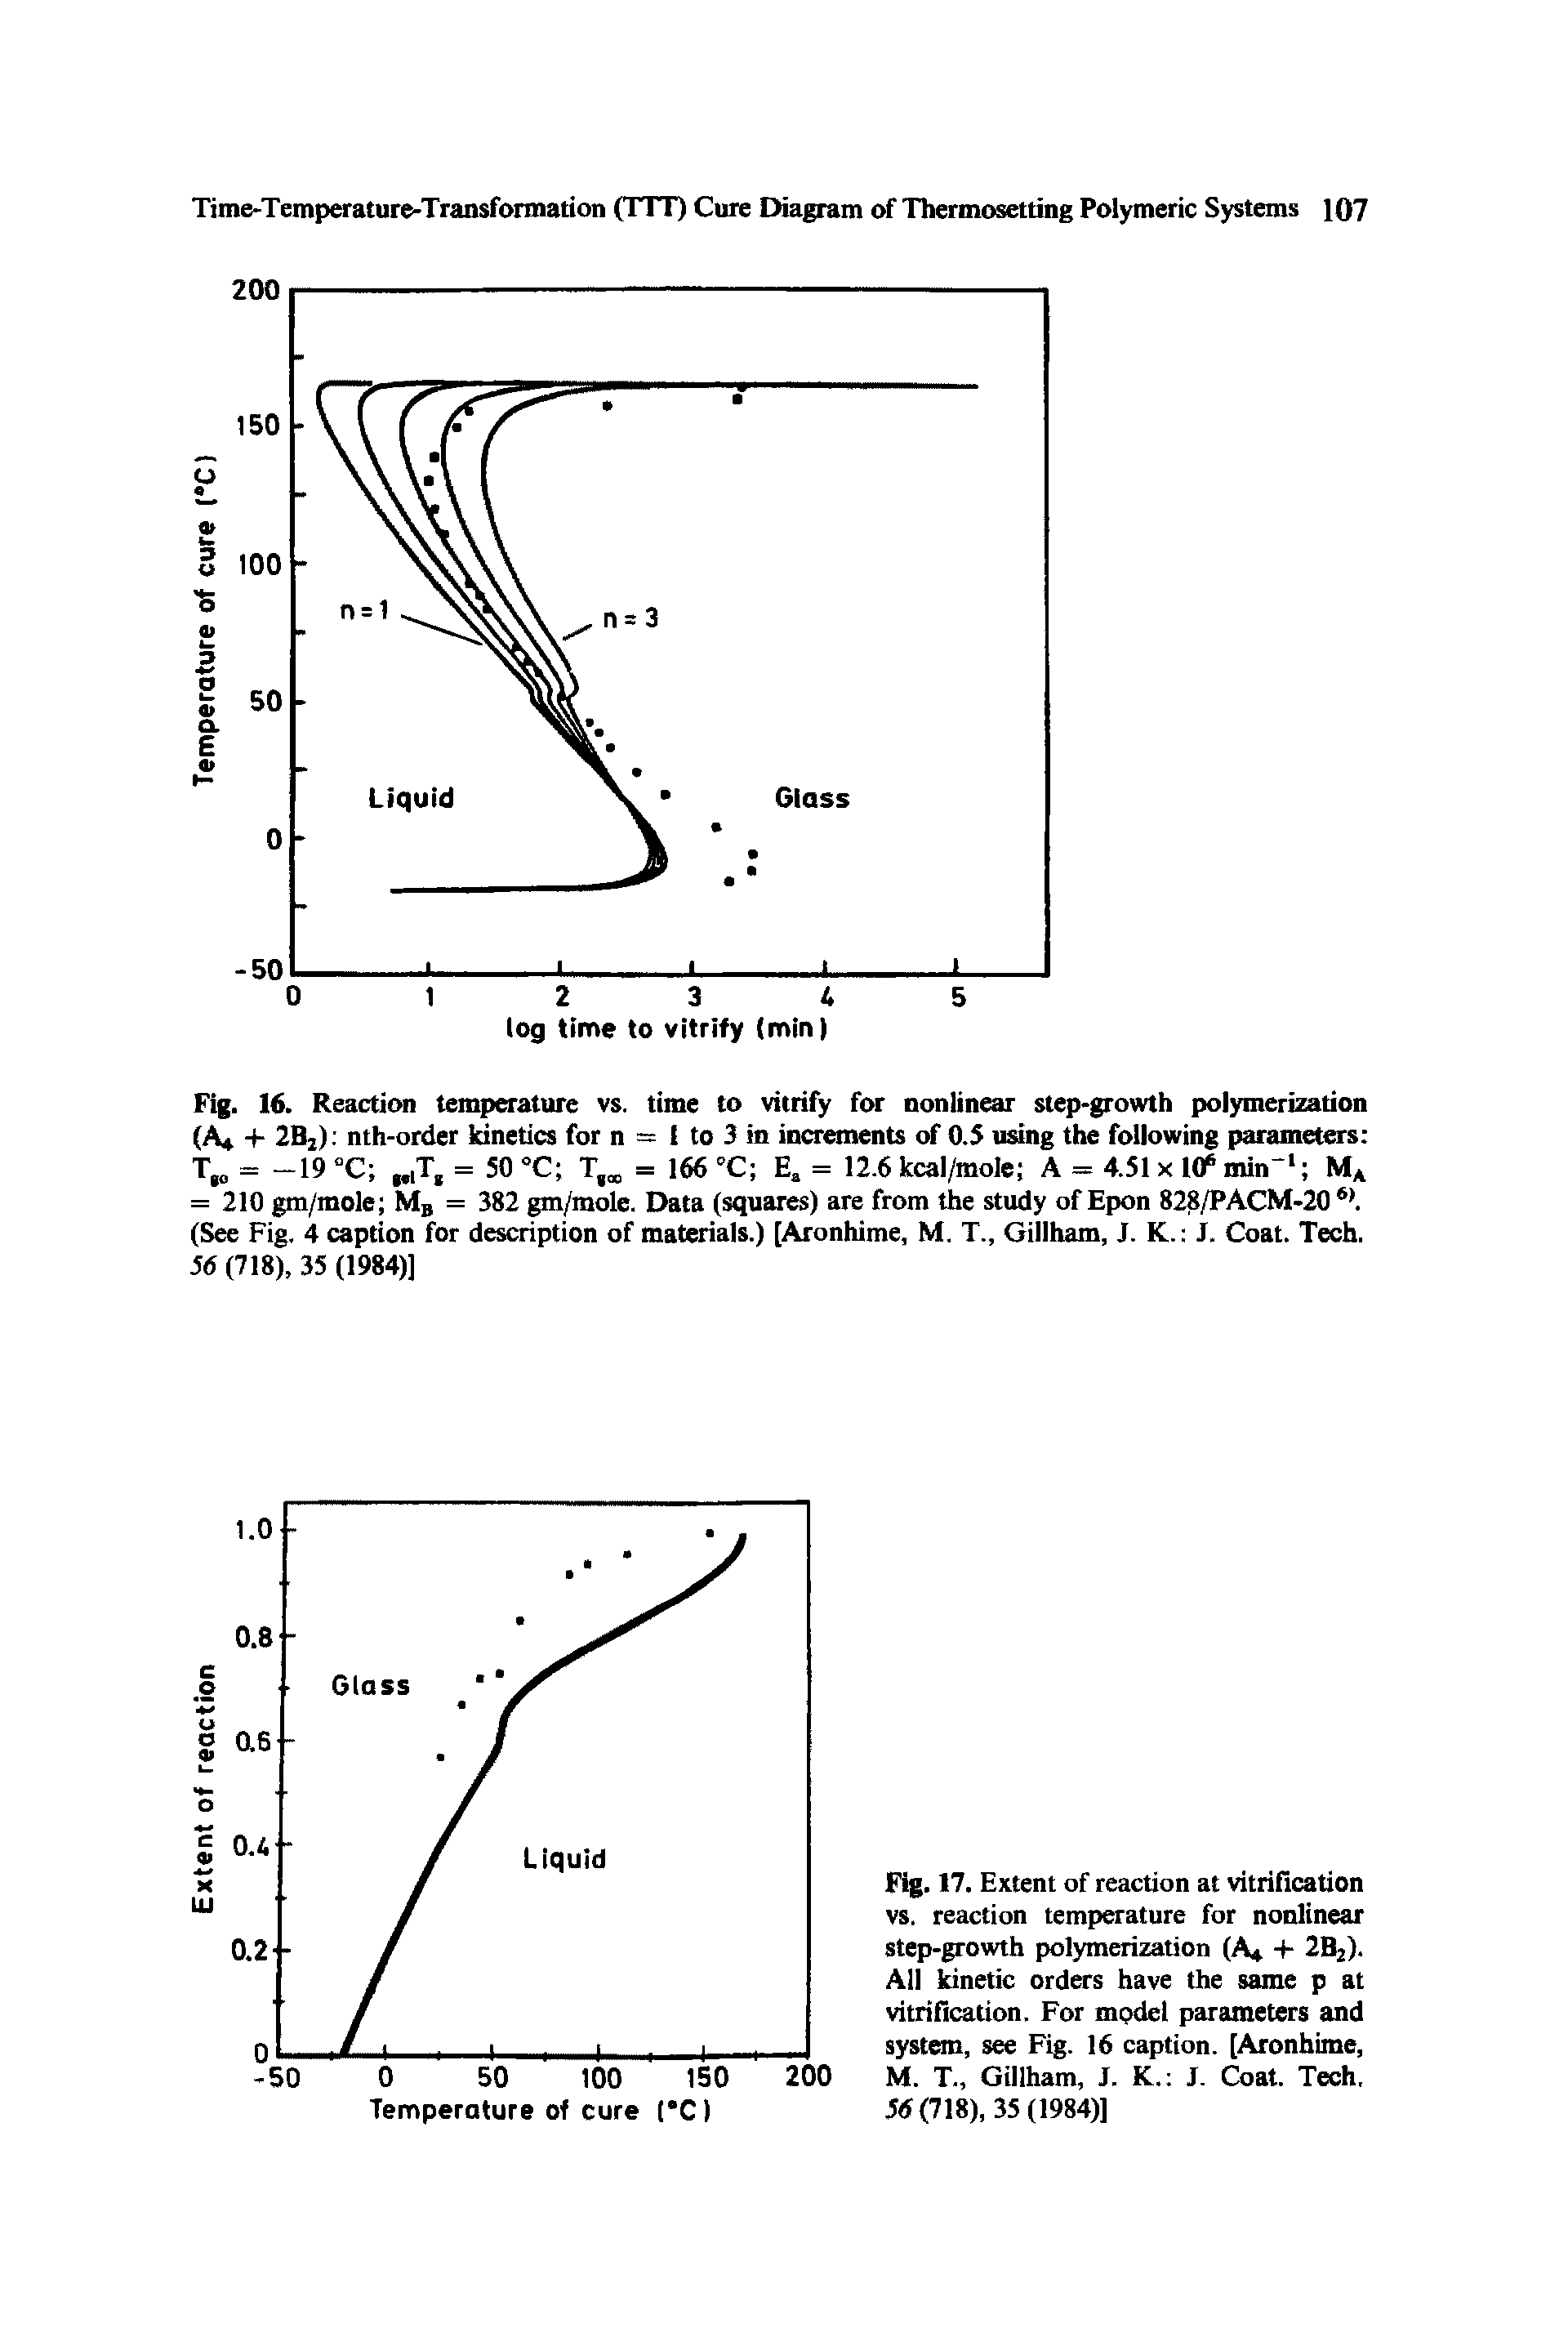 Fig. 16. Reaction tenqterature vs. time to vitrify for nonlinear step-growth polymerisition (A 4- 2B2) nth-order kinetics for n = t to 3 in inoements of 0.5 using the following parameters T, = -19 X ,T,= SOX T, = 166 X E. = 12.6 kcal/mole A = 4.51 x 10 min- M = 210 gm/mole Mg = 382 gm/mole. Data (squares) are from the study of Epon 82 /PACM-20 (See Fig. 4 caption for description of materials.) [Aronhime, M. T., Gillham, J. K. J. Coat. Tech. S6 (718), 35 (1984)]...